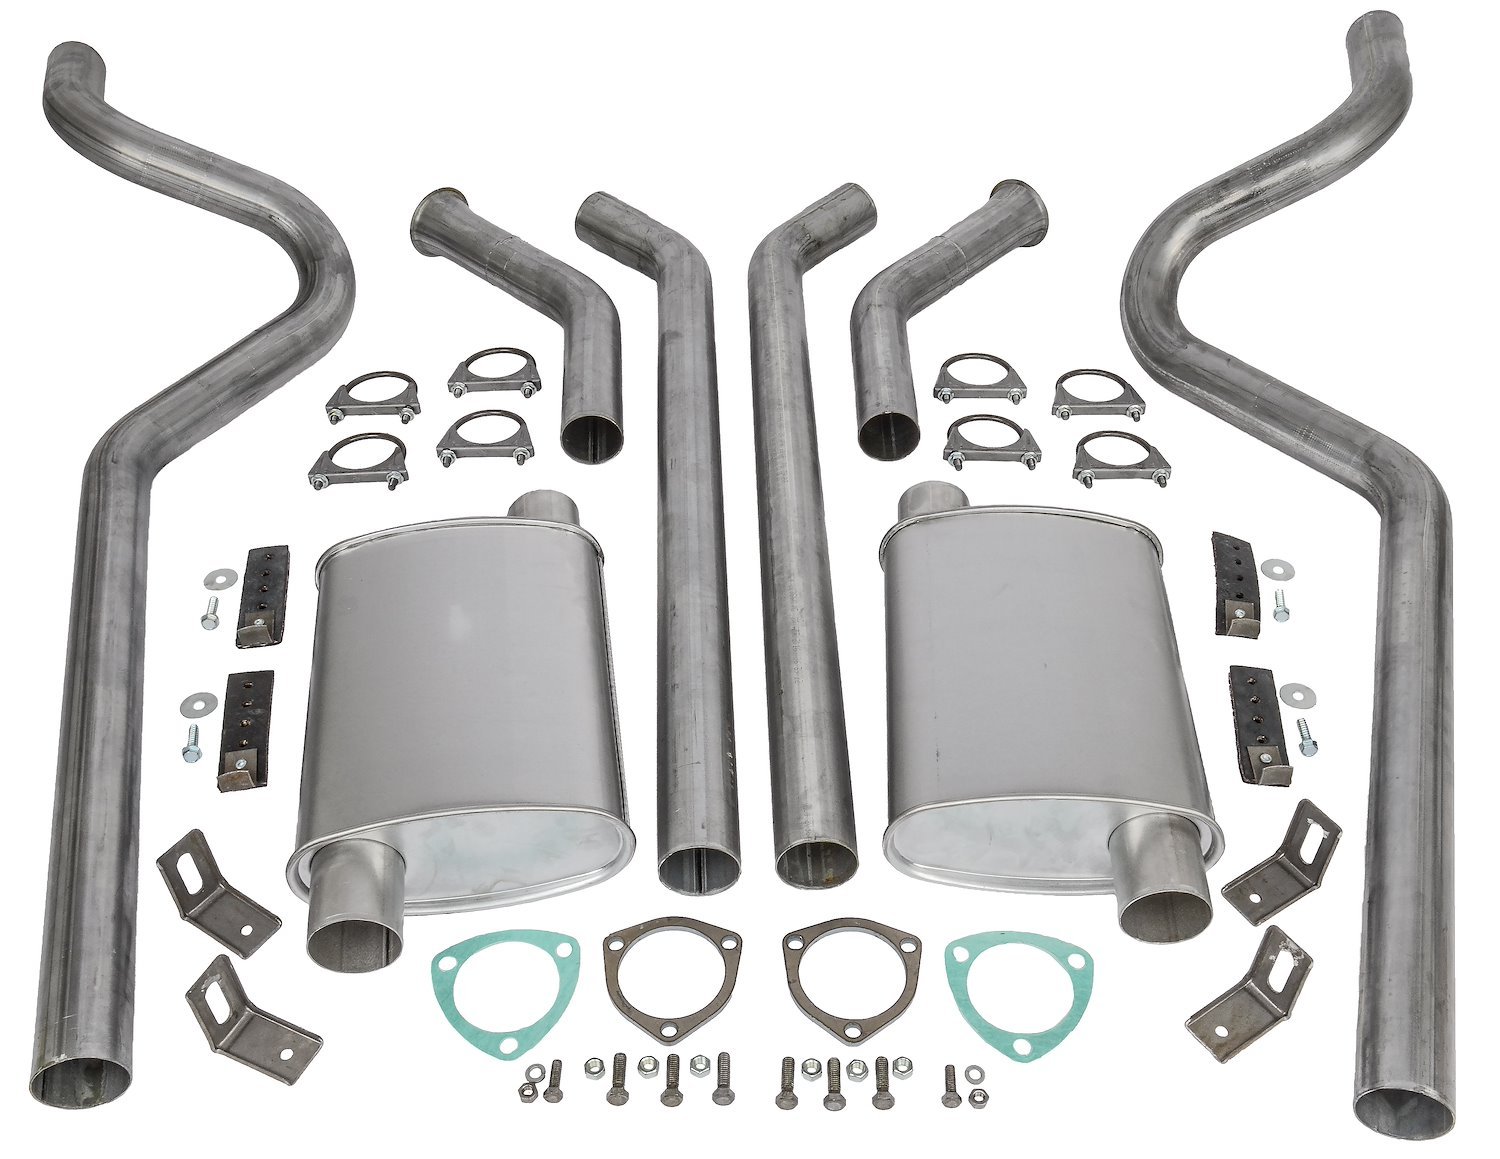 Header-Back Dual 2-1/2 in. Exhaust Kit for 1964-1973 Mustang